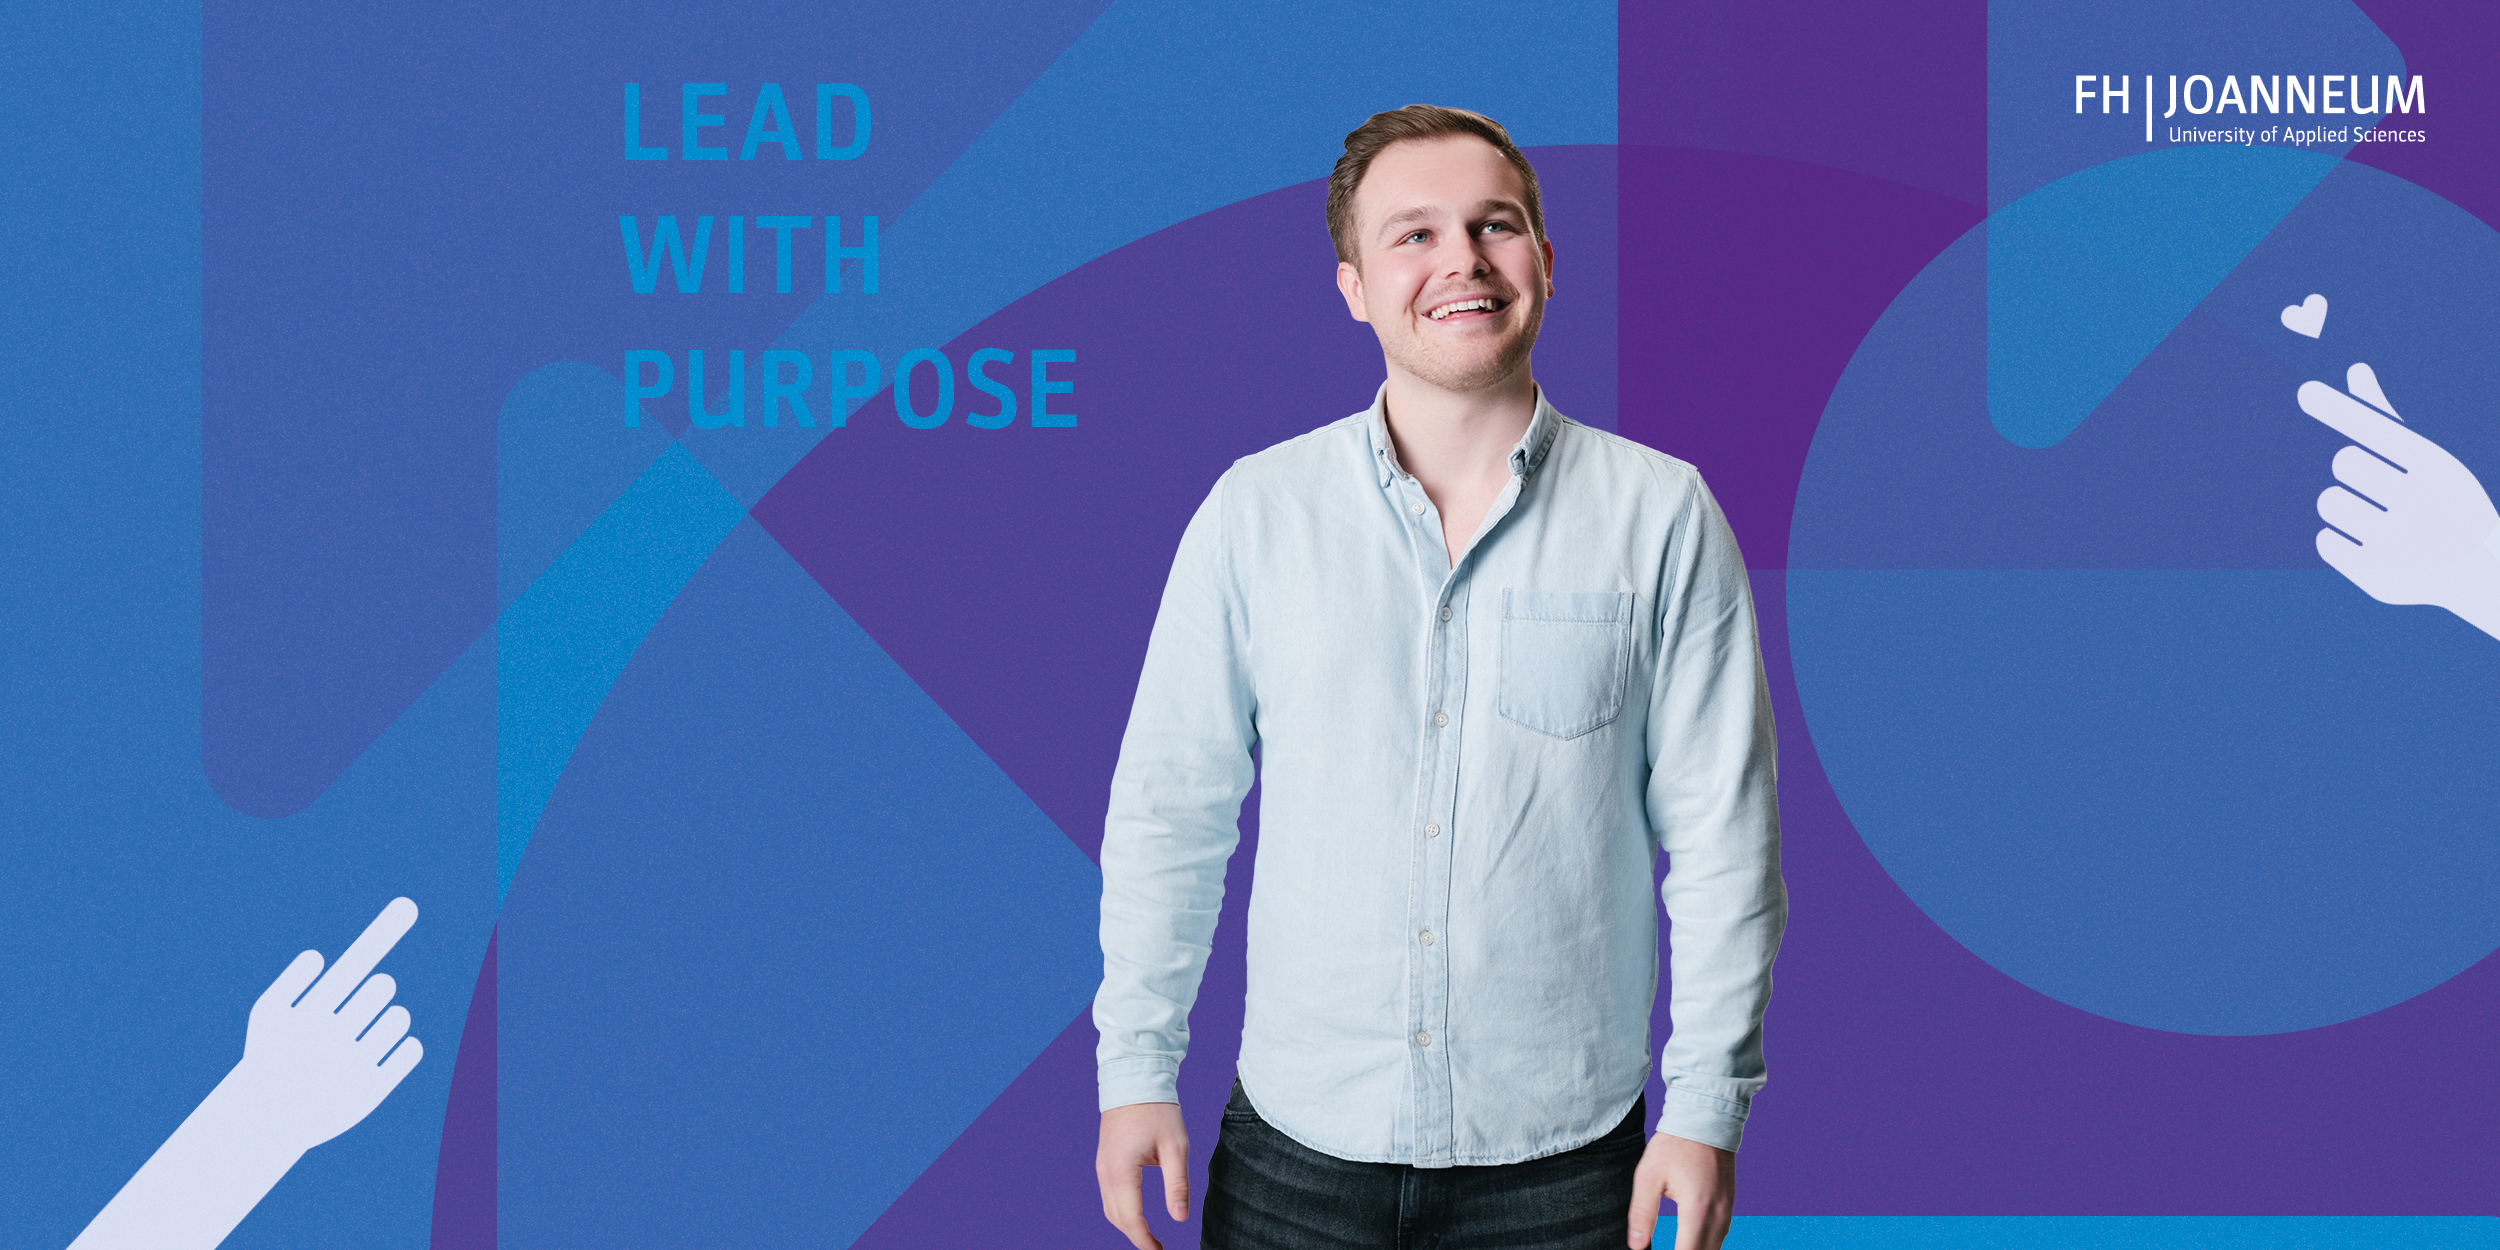 Lead with Purpose: Johannes Meindl